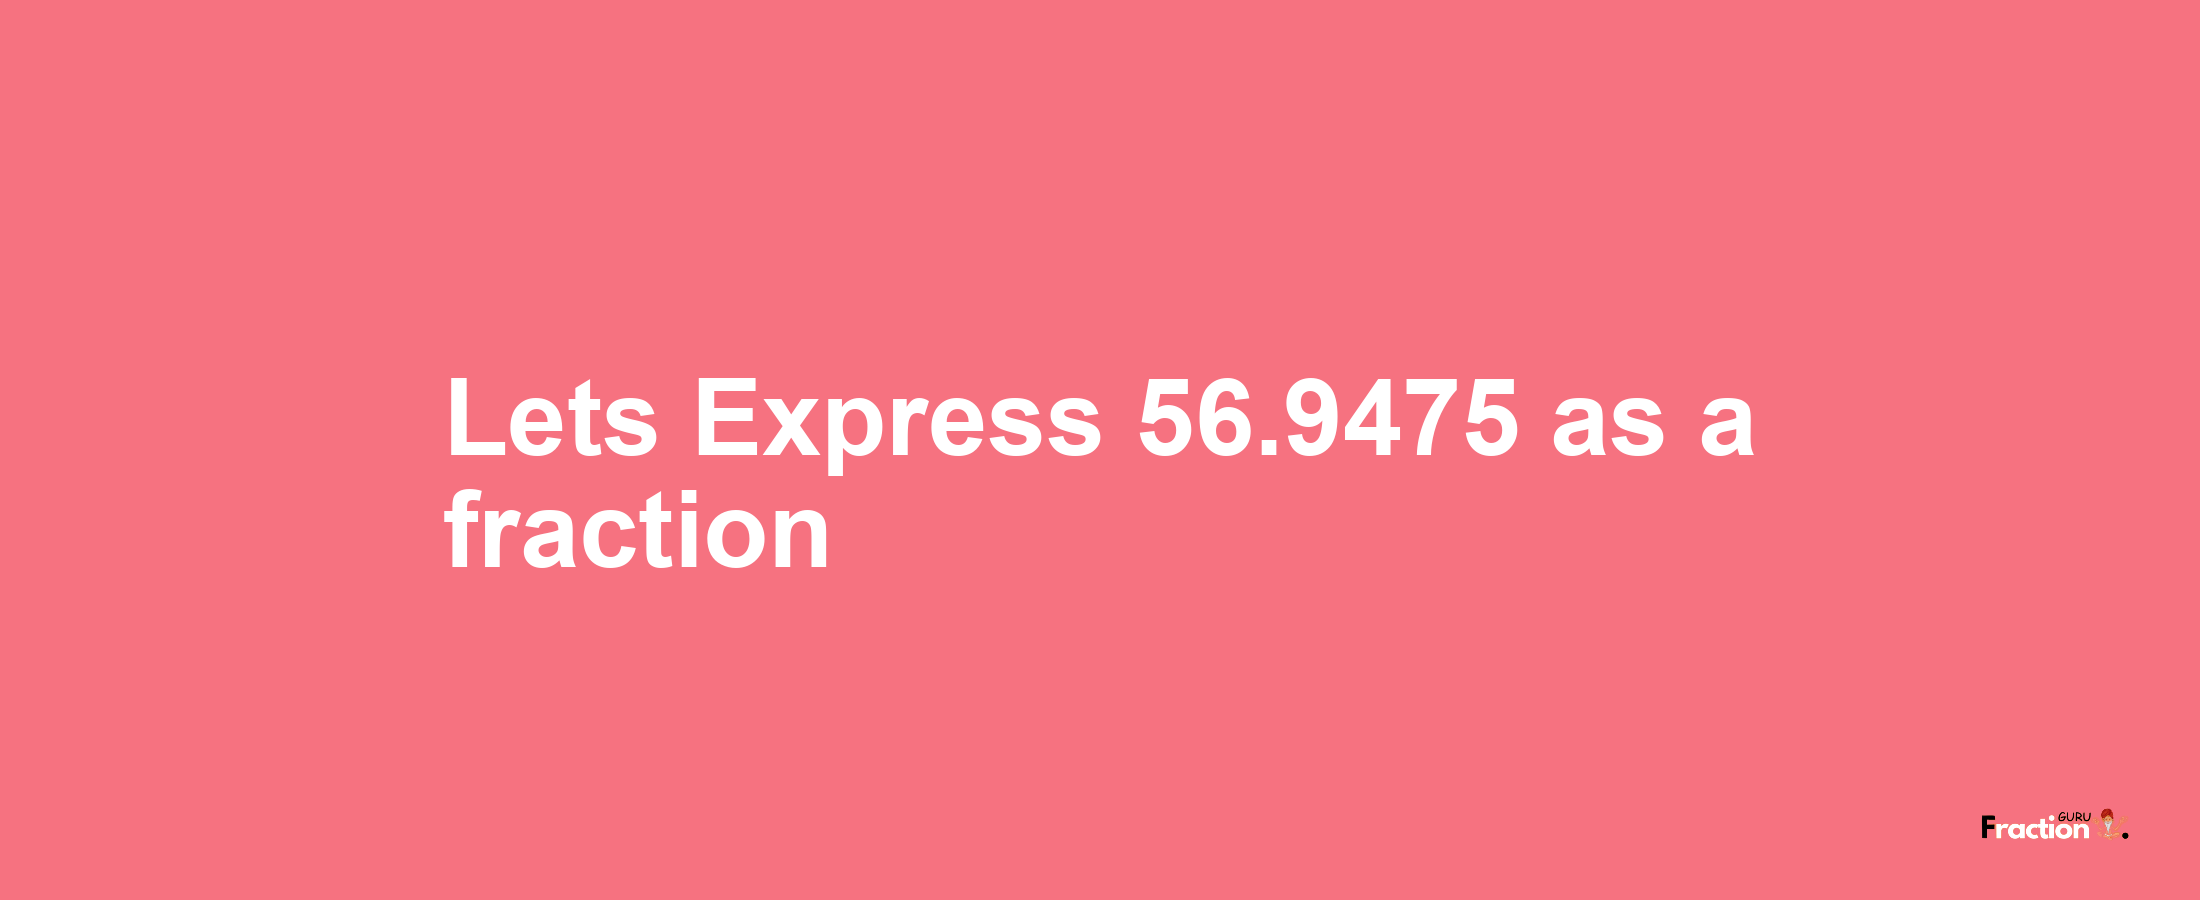 Lets Express 56.9475 as afraction